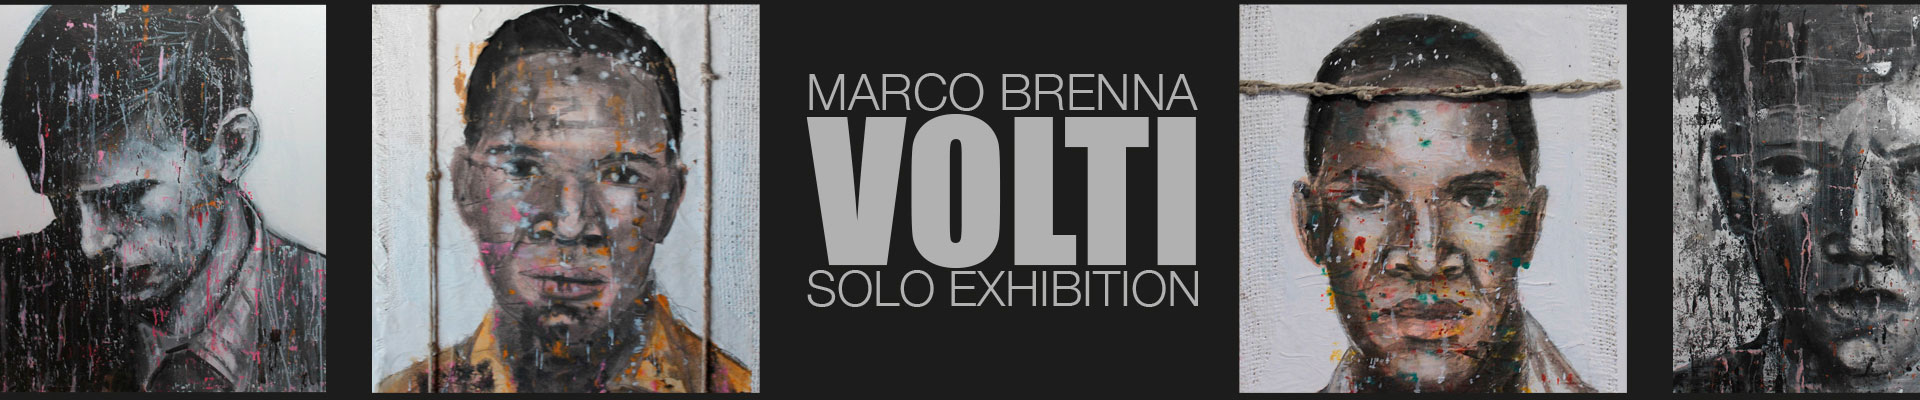 VOLTI-VERNISSAGE-with-the-artist-Marco-Brenna